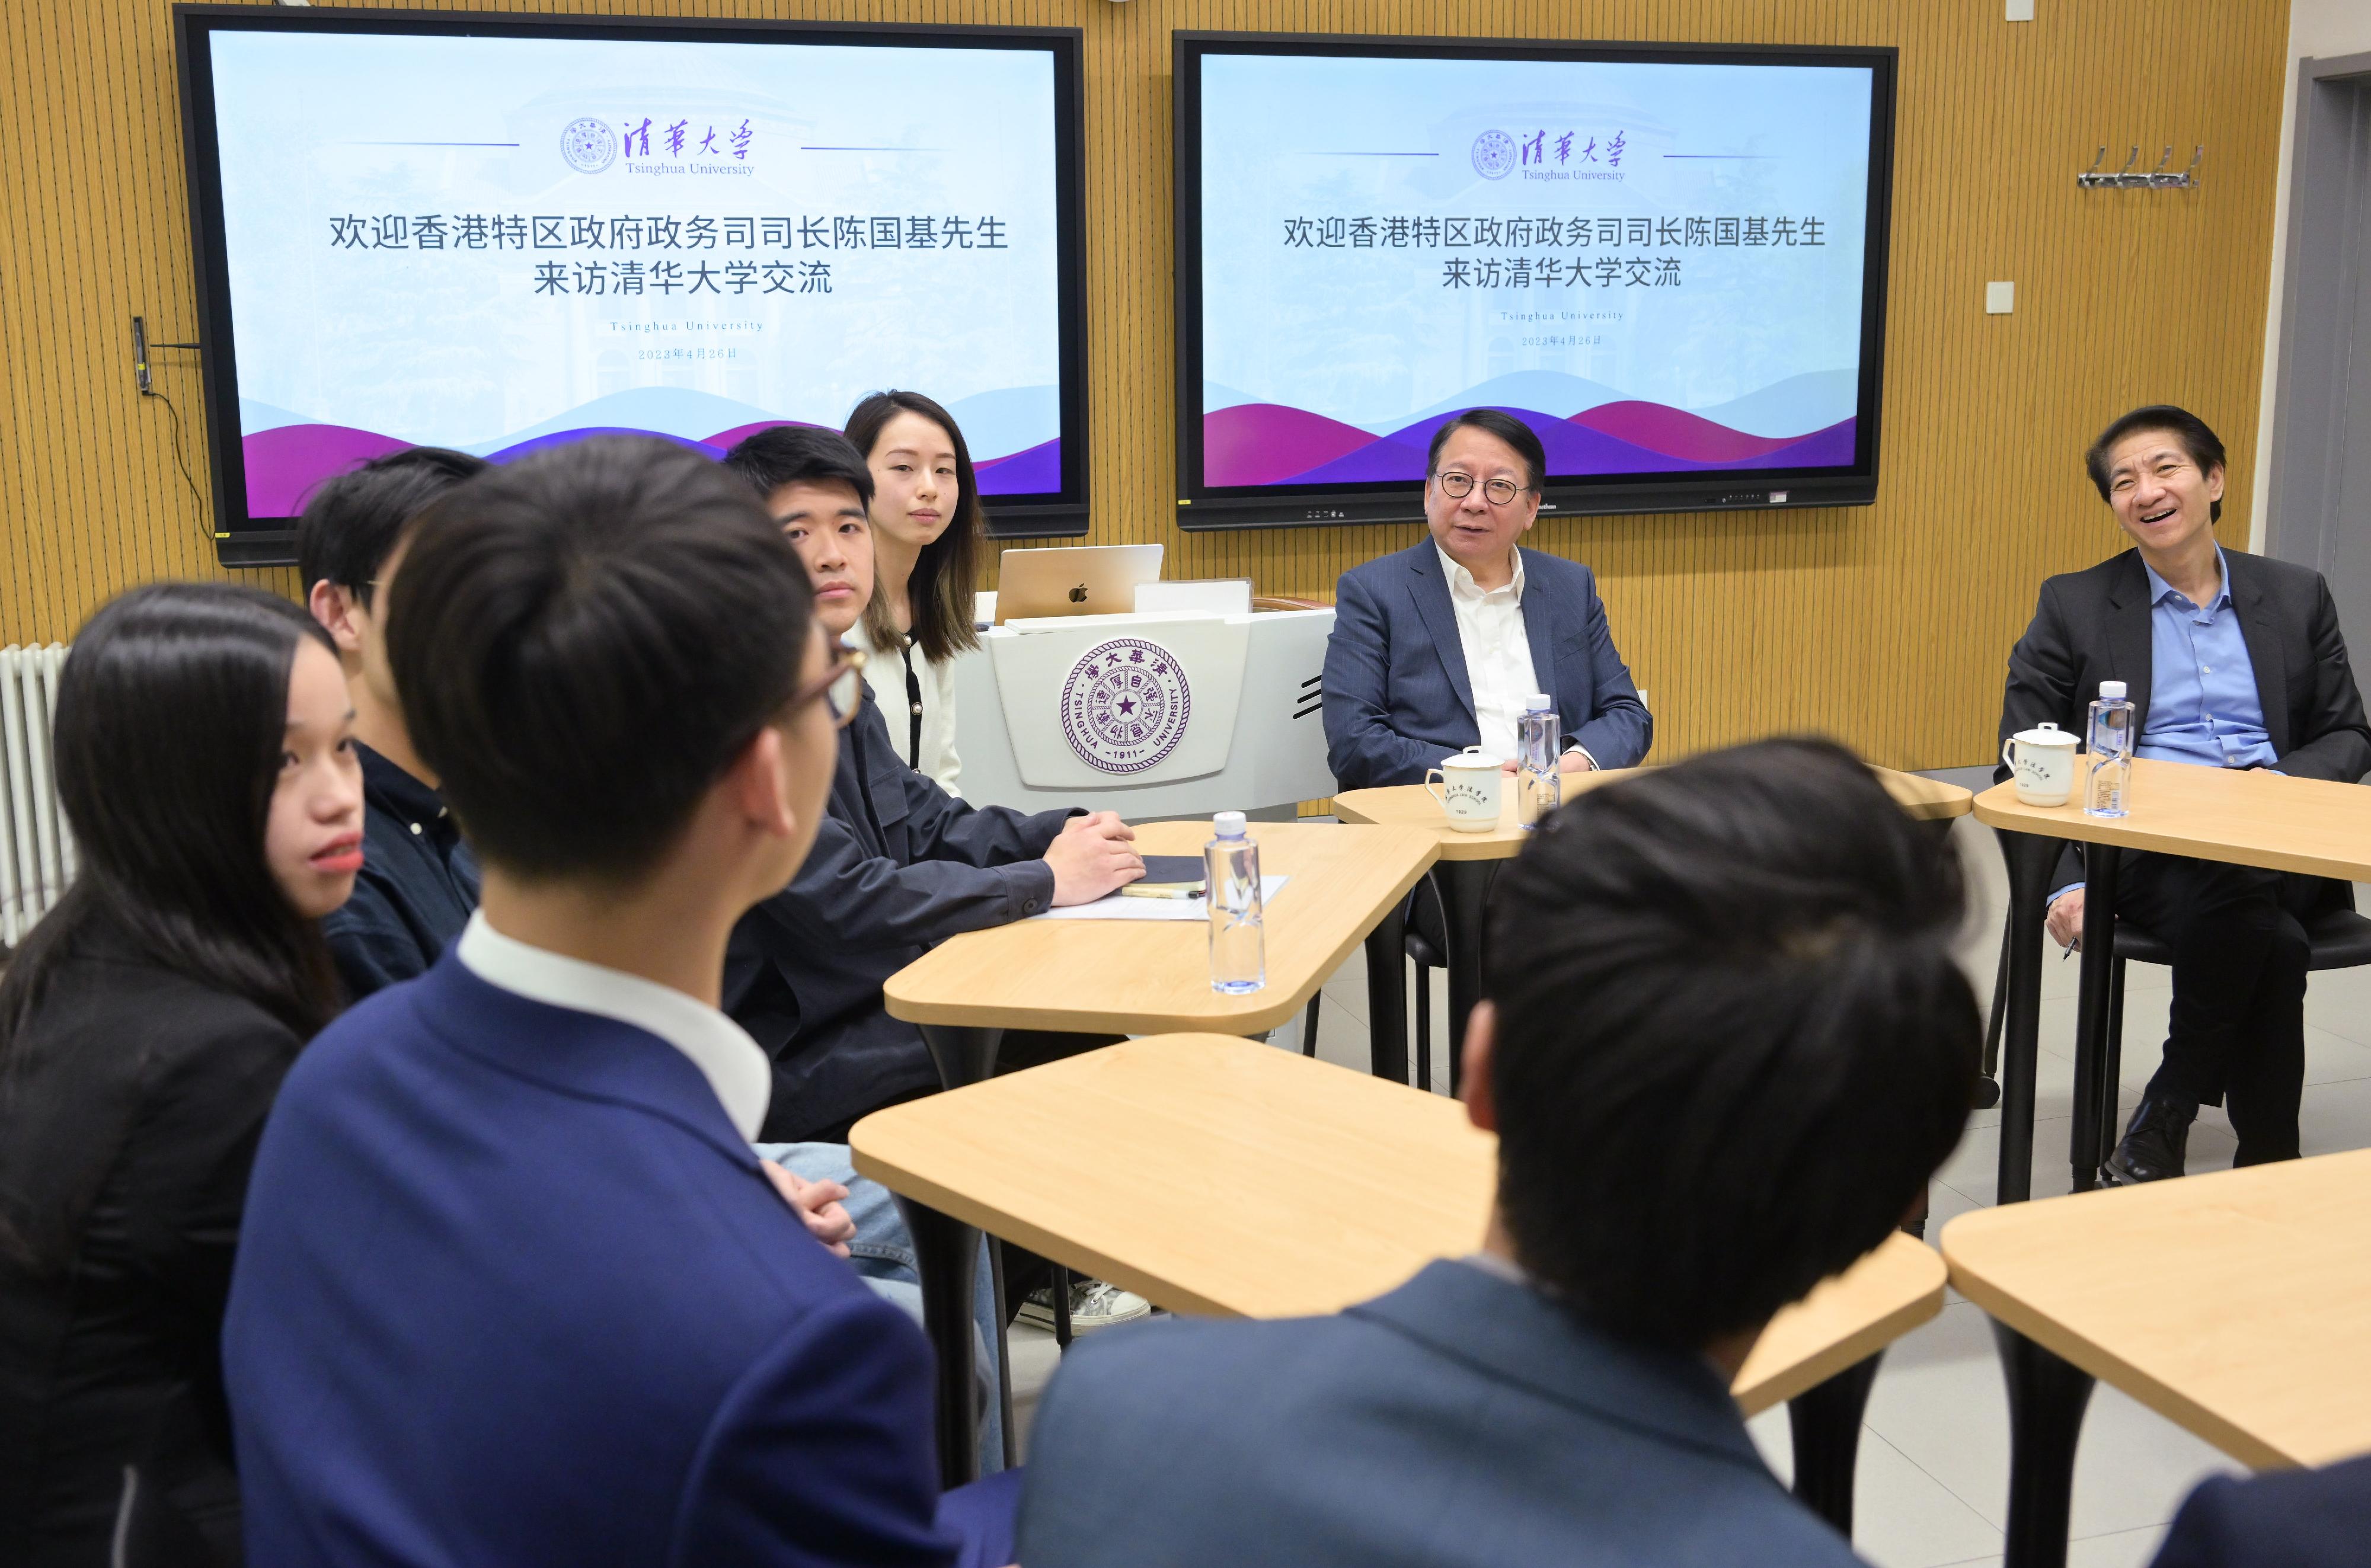 The Chief Secretary for Administration, Mr Chan Kwok-ki, began his visit in Beijing today (April 26). Photo shows Mr Chan (second right), accompanied by the Director of the Office of the Government of the Hong Kong Special Administrative Region in Beijing, Mr Rex Chang (first right), meeting with Hong Kong students studying at Tsinghua University in Beijing today (April 26).